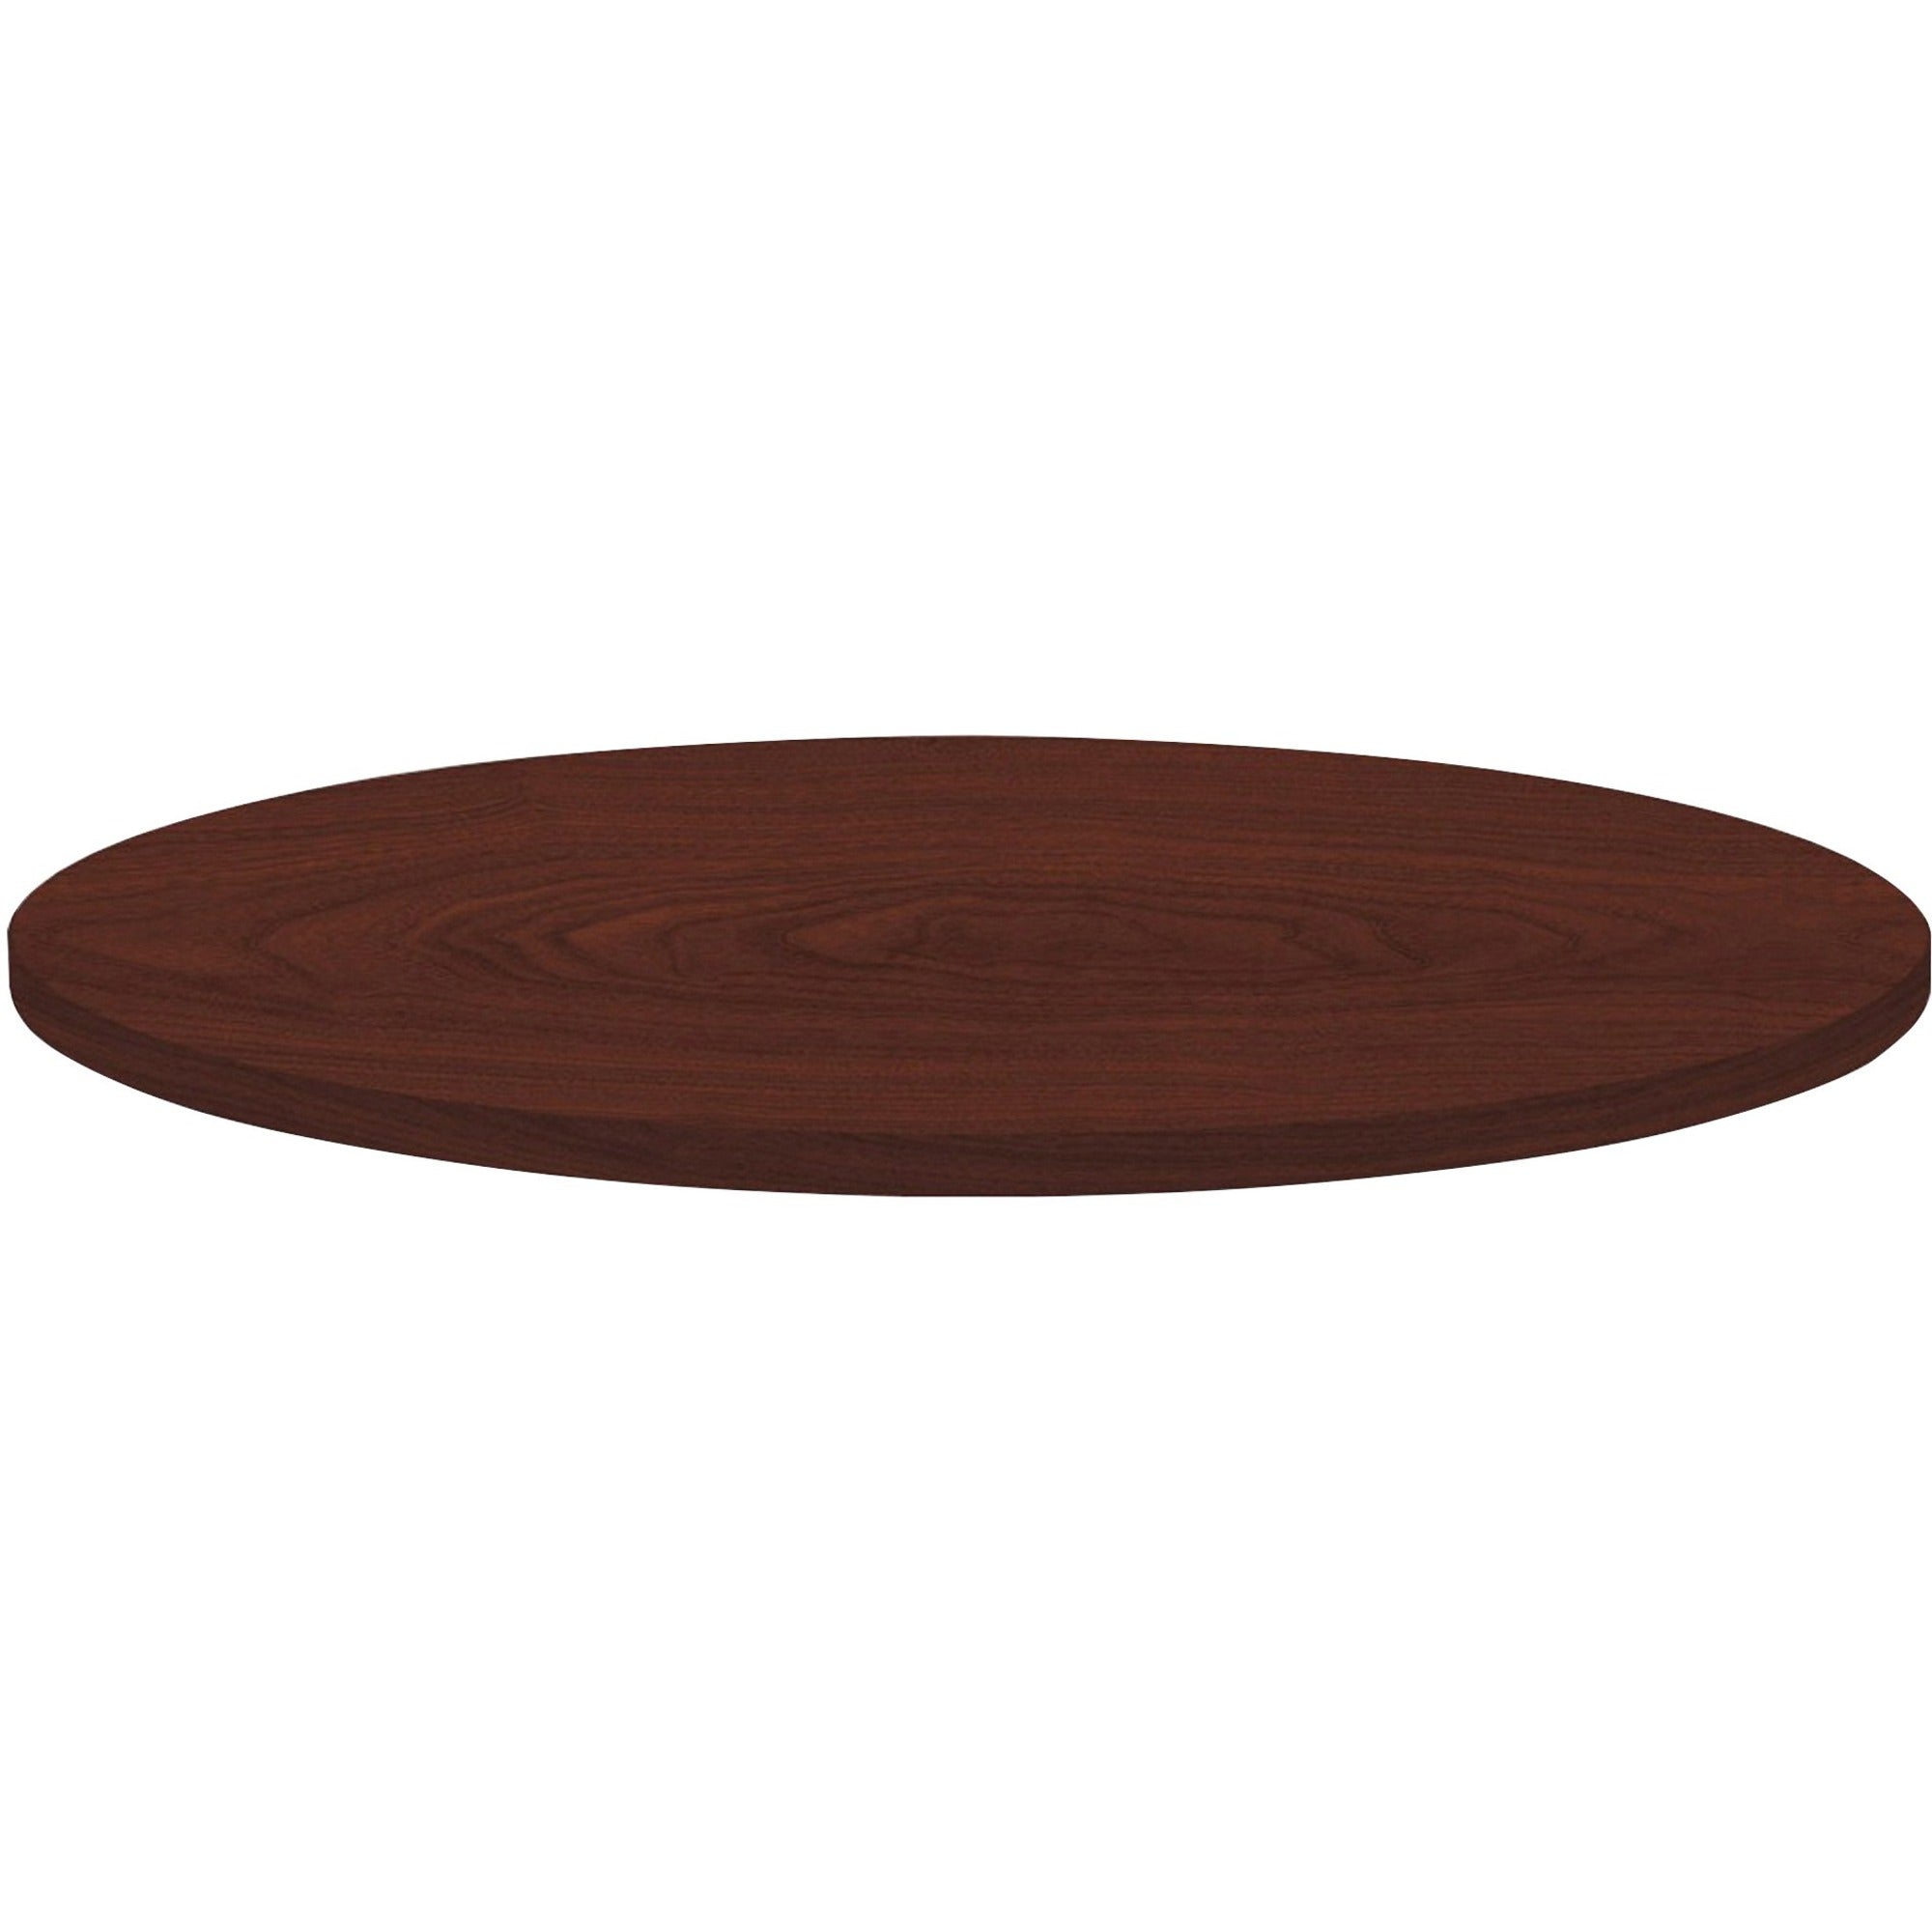 Lorell Hospitality Collection Tabletop - For - Table TopRound Top x 1" Table Top Thickness x 42" Table Top Diameter - Assembly Required - High Pressure Laminate (HPL), Mahogany - Particleboard, Polyvinyl Chloride (PVC) - 1 Each - 